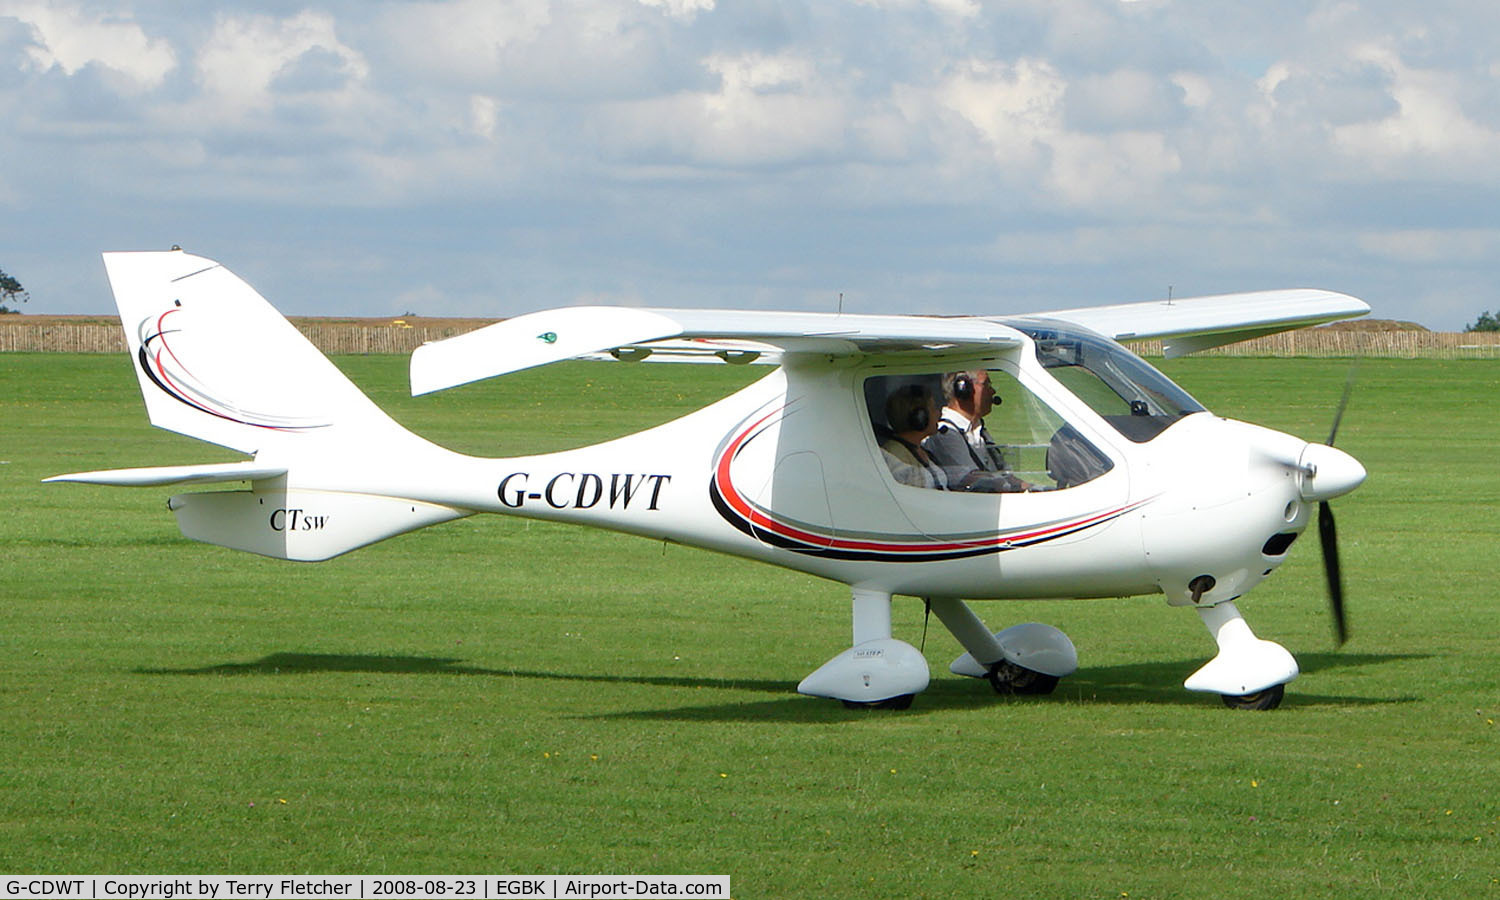 G-CDWT, 2006 Flight Design CTSW C/N 8162, Visitor to Sywell on 2008 Ragwing Fly-in day